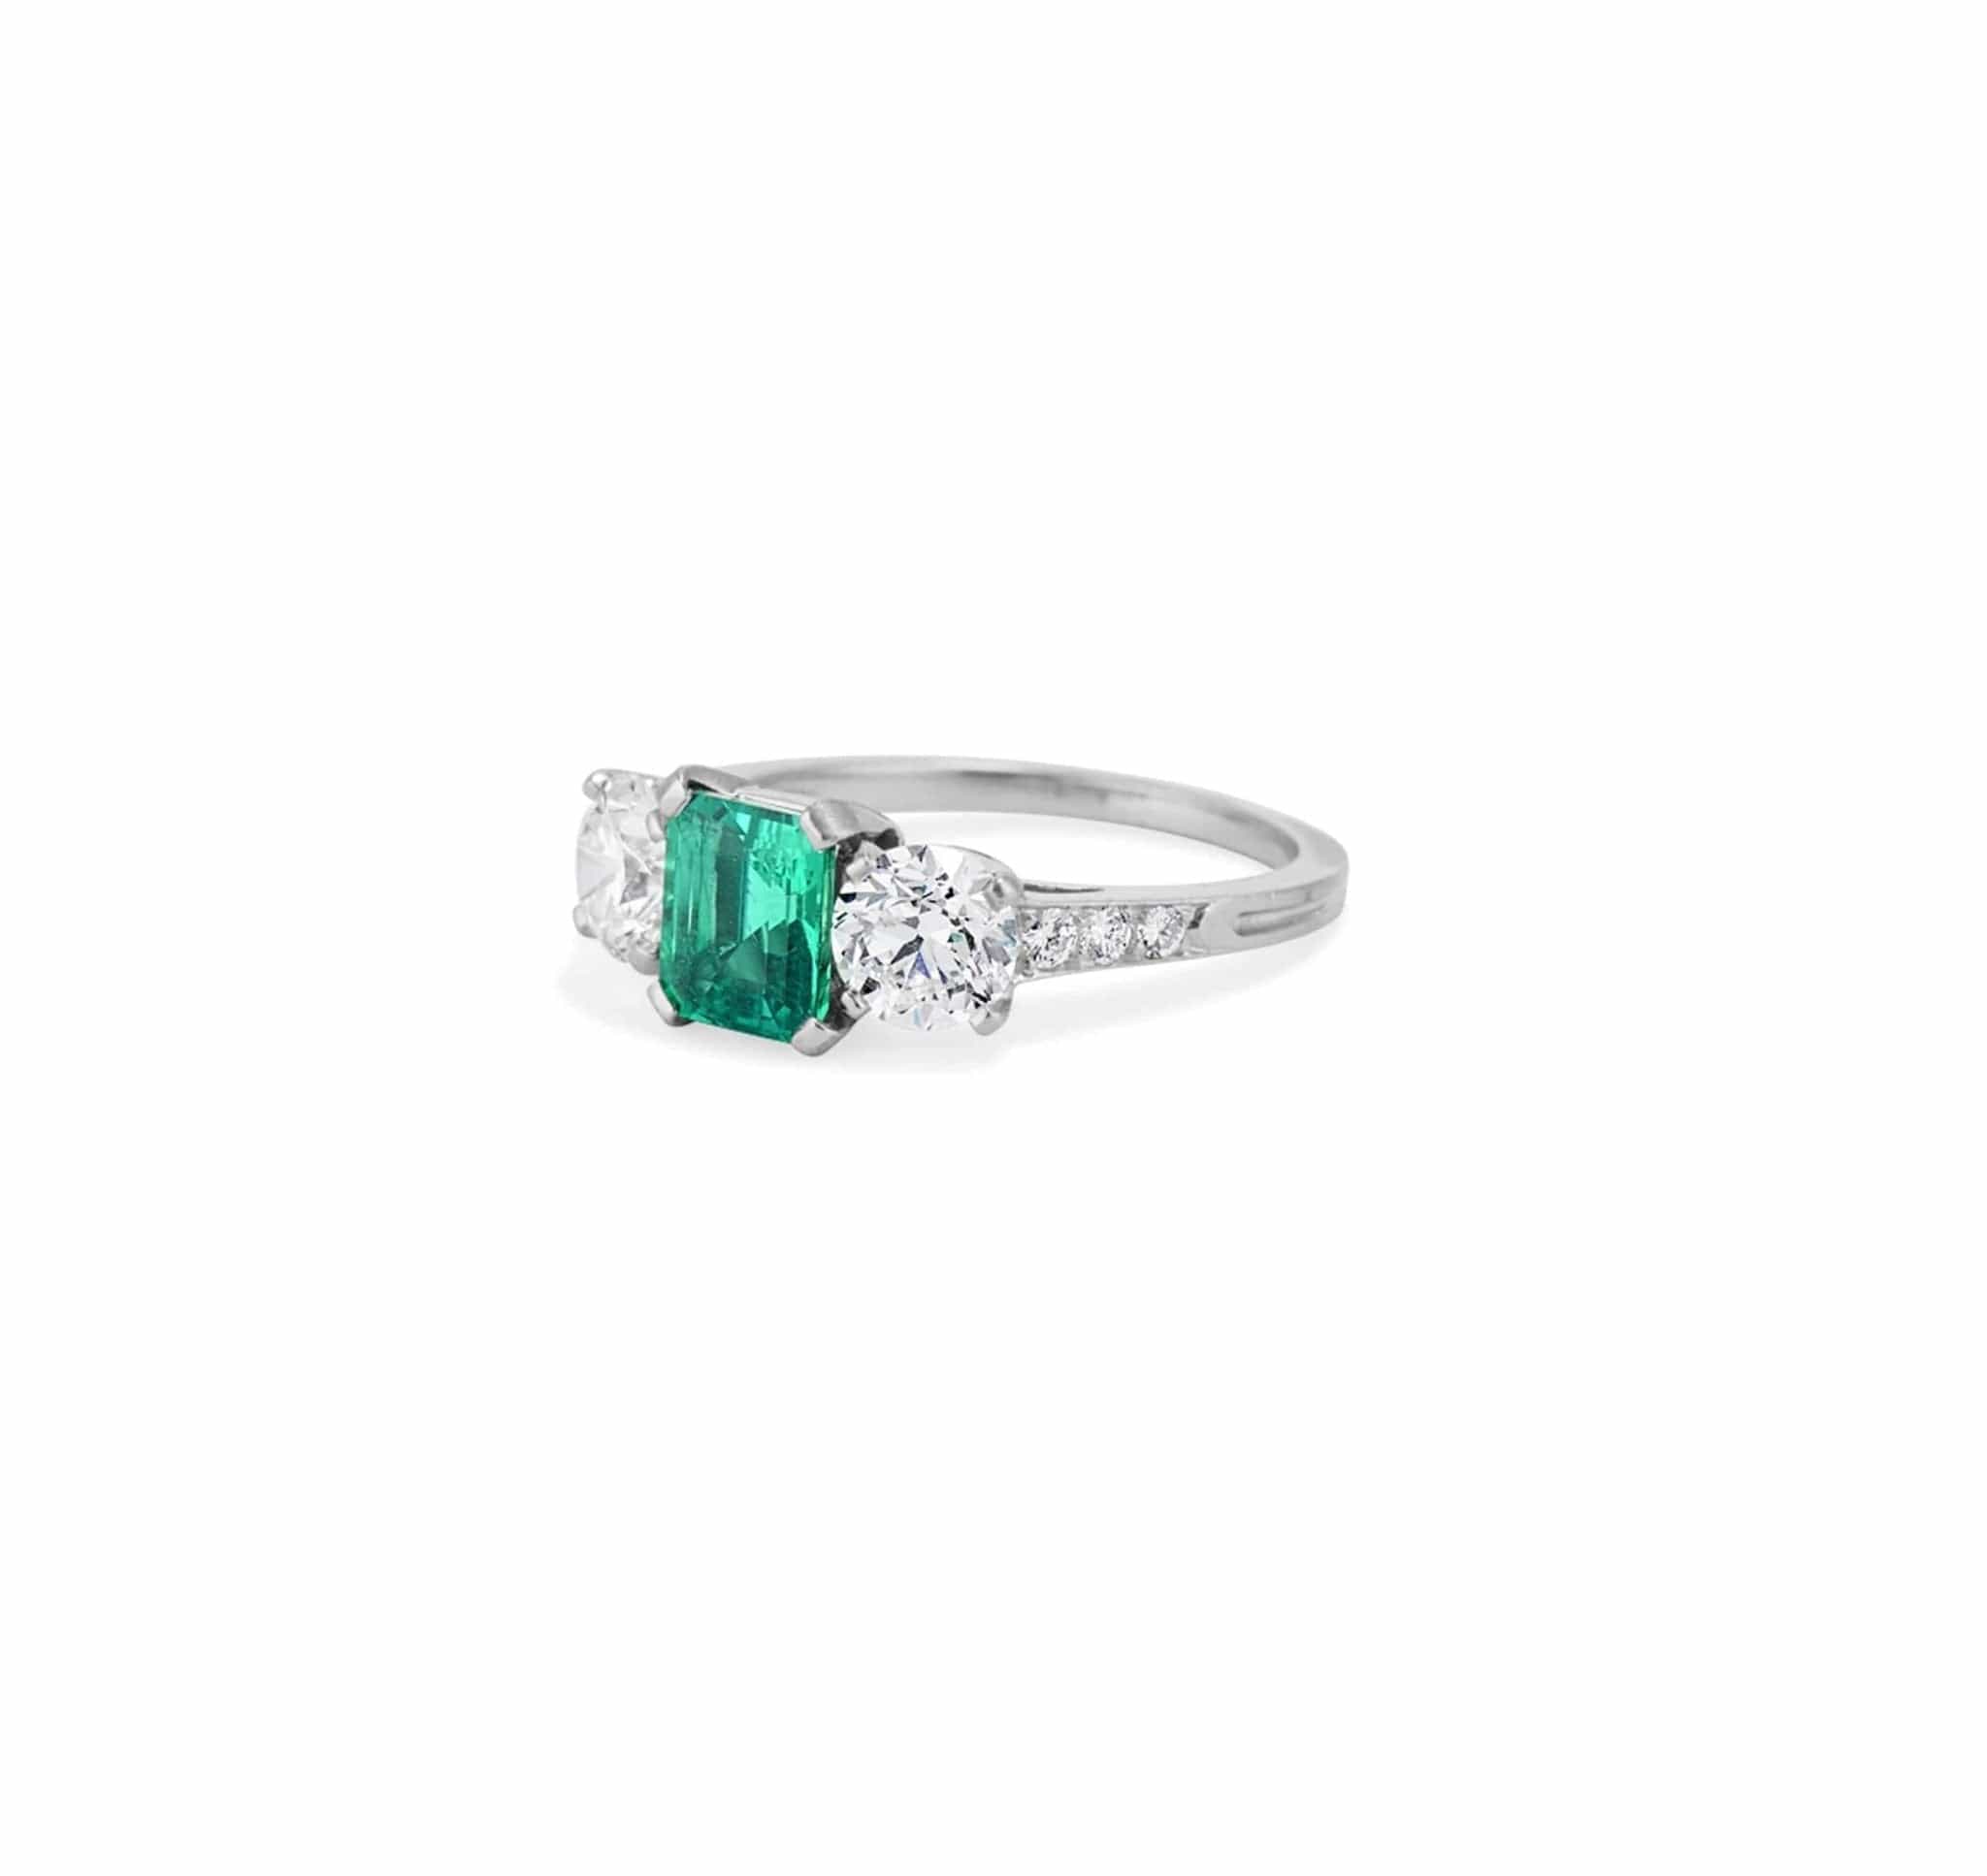 Tiffany Soleste ring in platinum with a .45-carat sapphire and diamonds. |  Tiffany & Co.